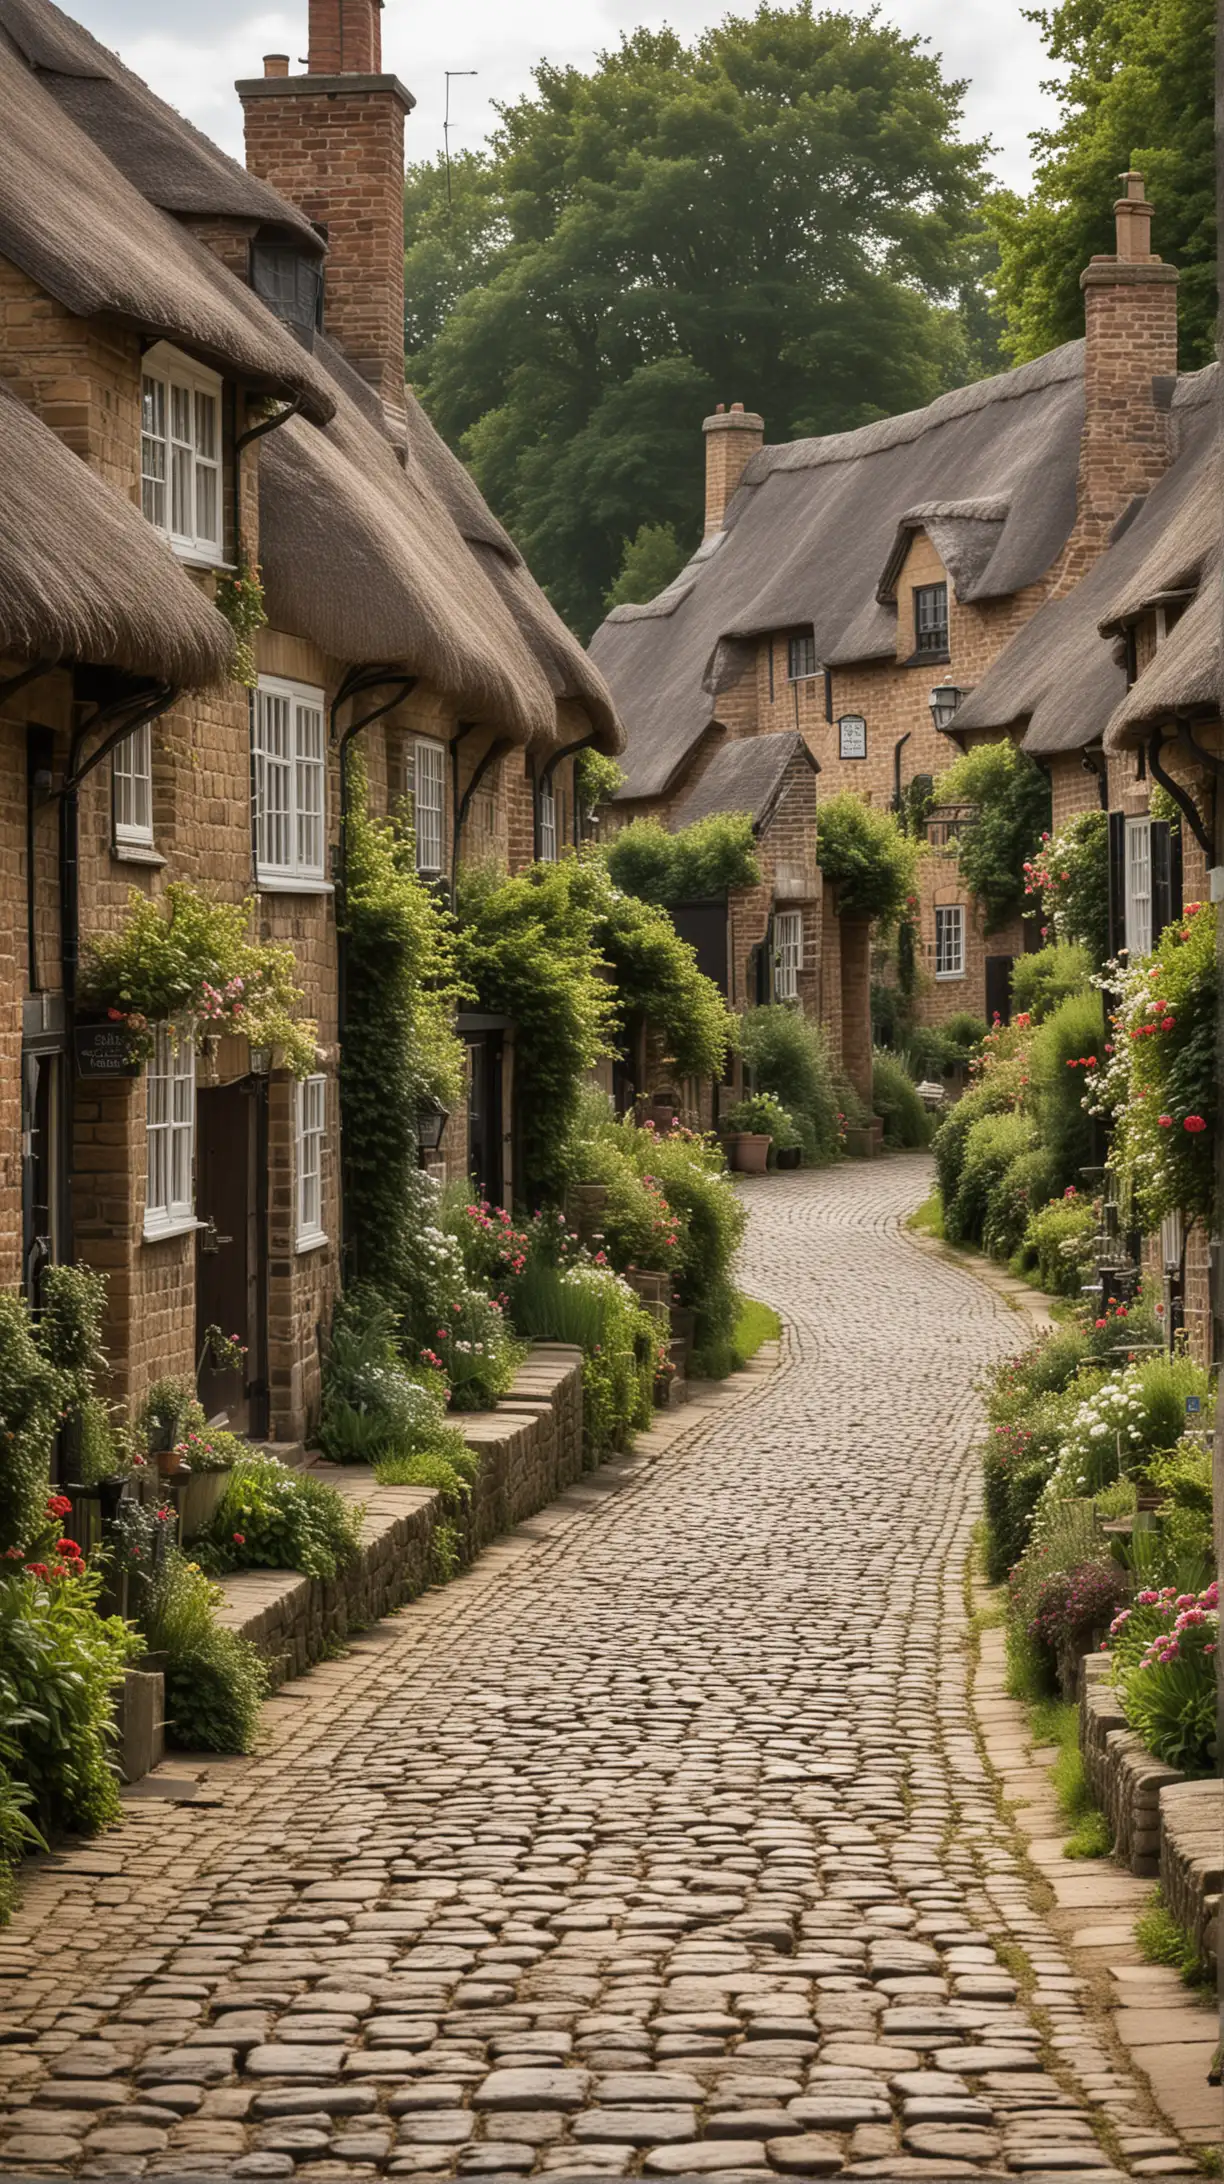 A quaint English village in the 18th century with cobblestone streets and thatched roof cottages.